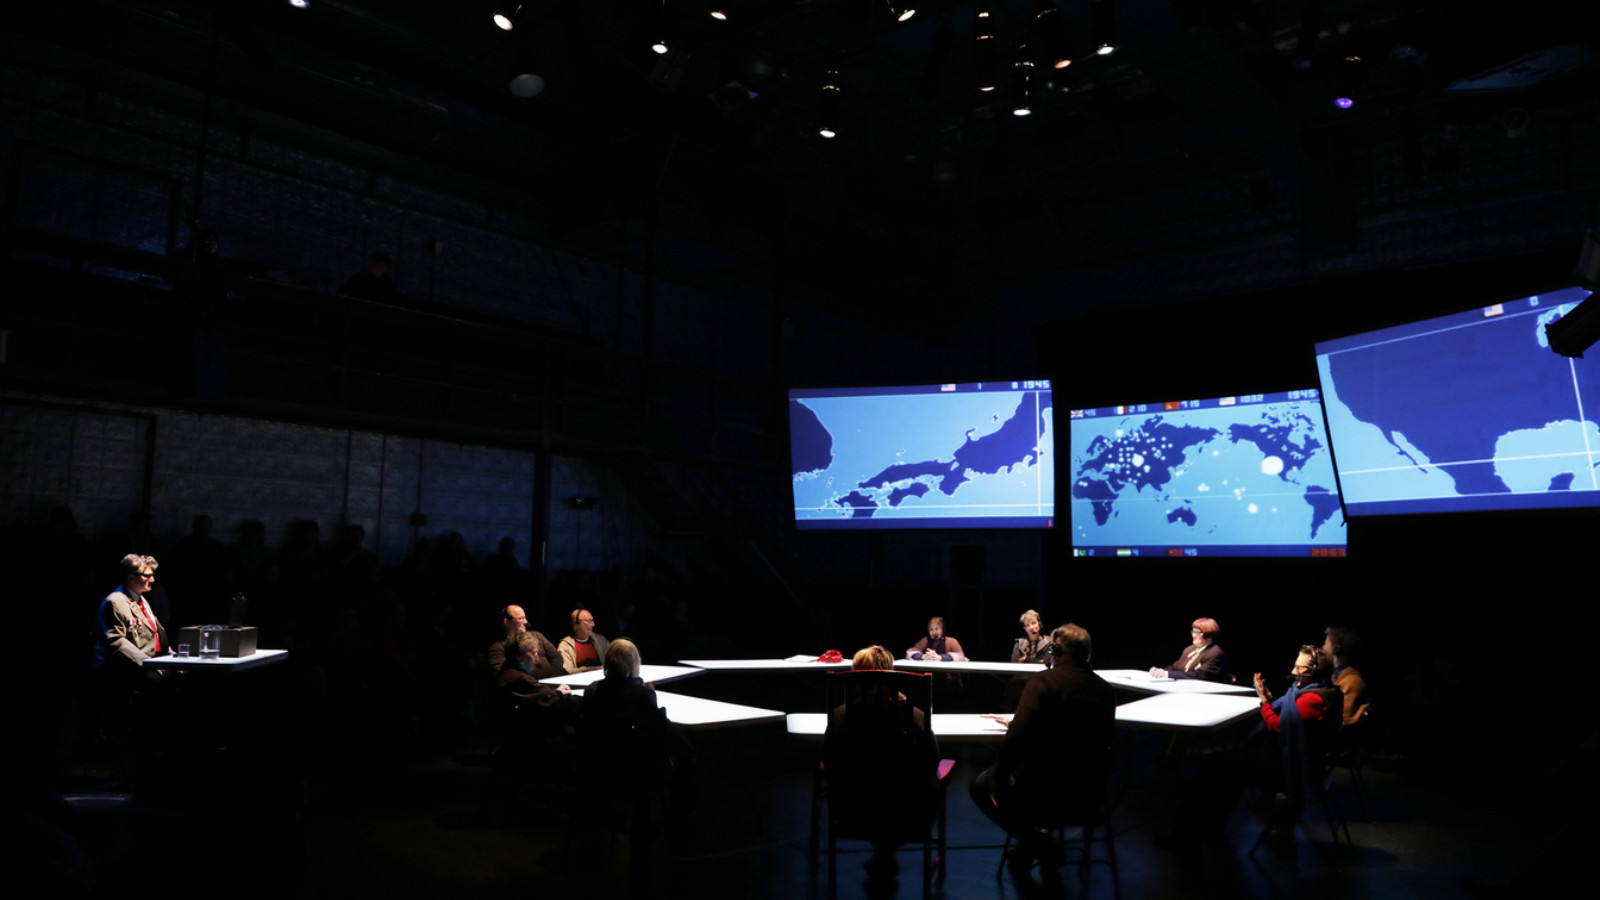 In a dark theatre 3 large screens suspended to one side. The screen show blueprint maps. A large circle of tables has a person sat at each table and are lit from above. To the side of the stage another table with one person faces towards the circle.